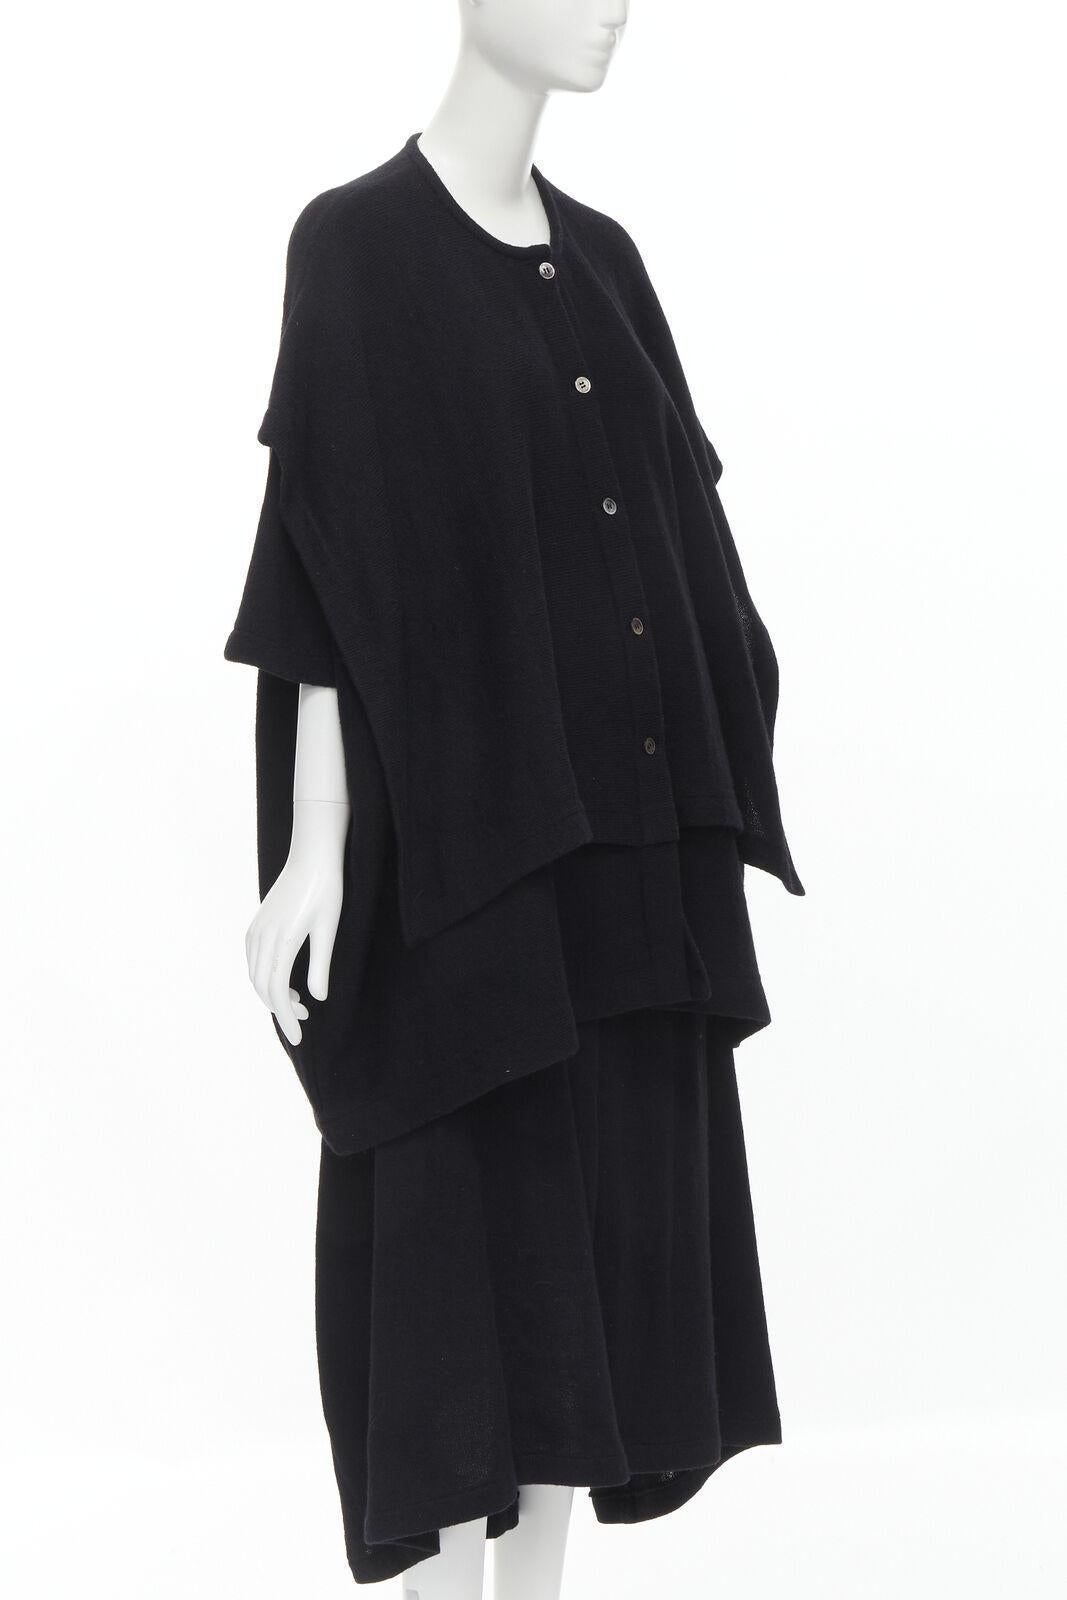 COMME DES GARCONS 1980's Vintage black wool trapeze layered sweater skirt set M
Reference: CRTI/A00593
Brand: Comme Des Garcons
Designer: Rei Kawakubo
Collection: 1980s
Material: Wool, Blend
Color: Black
Pattern: Solid
Closure: Button
Extra Details: